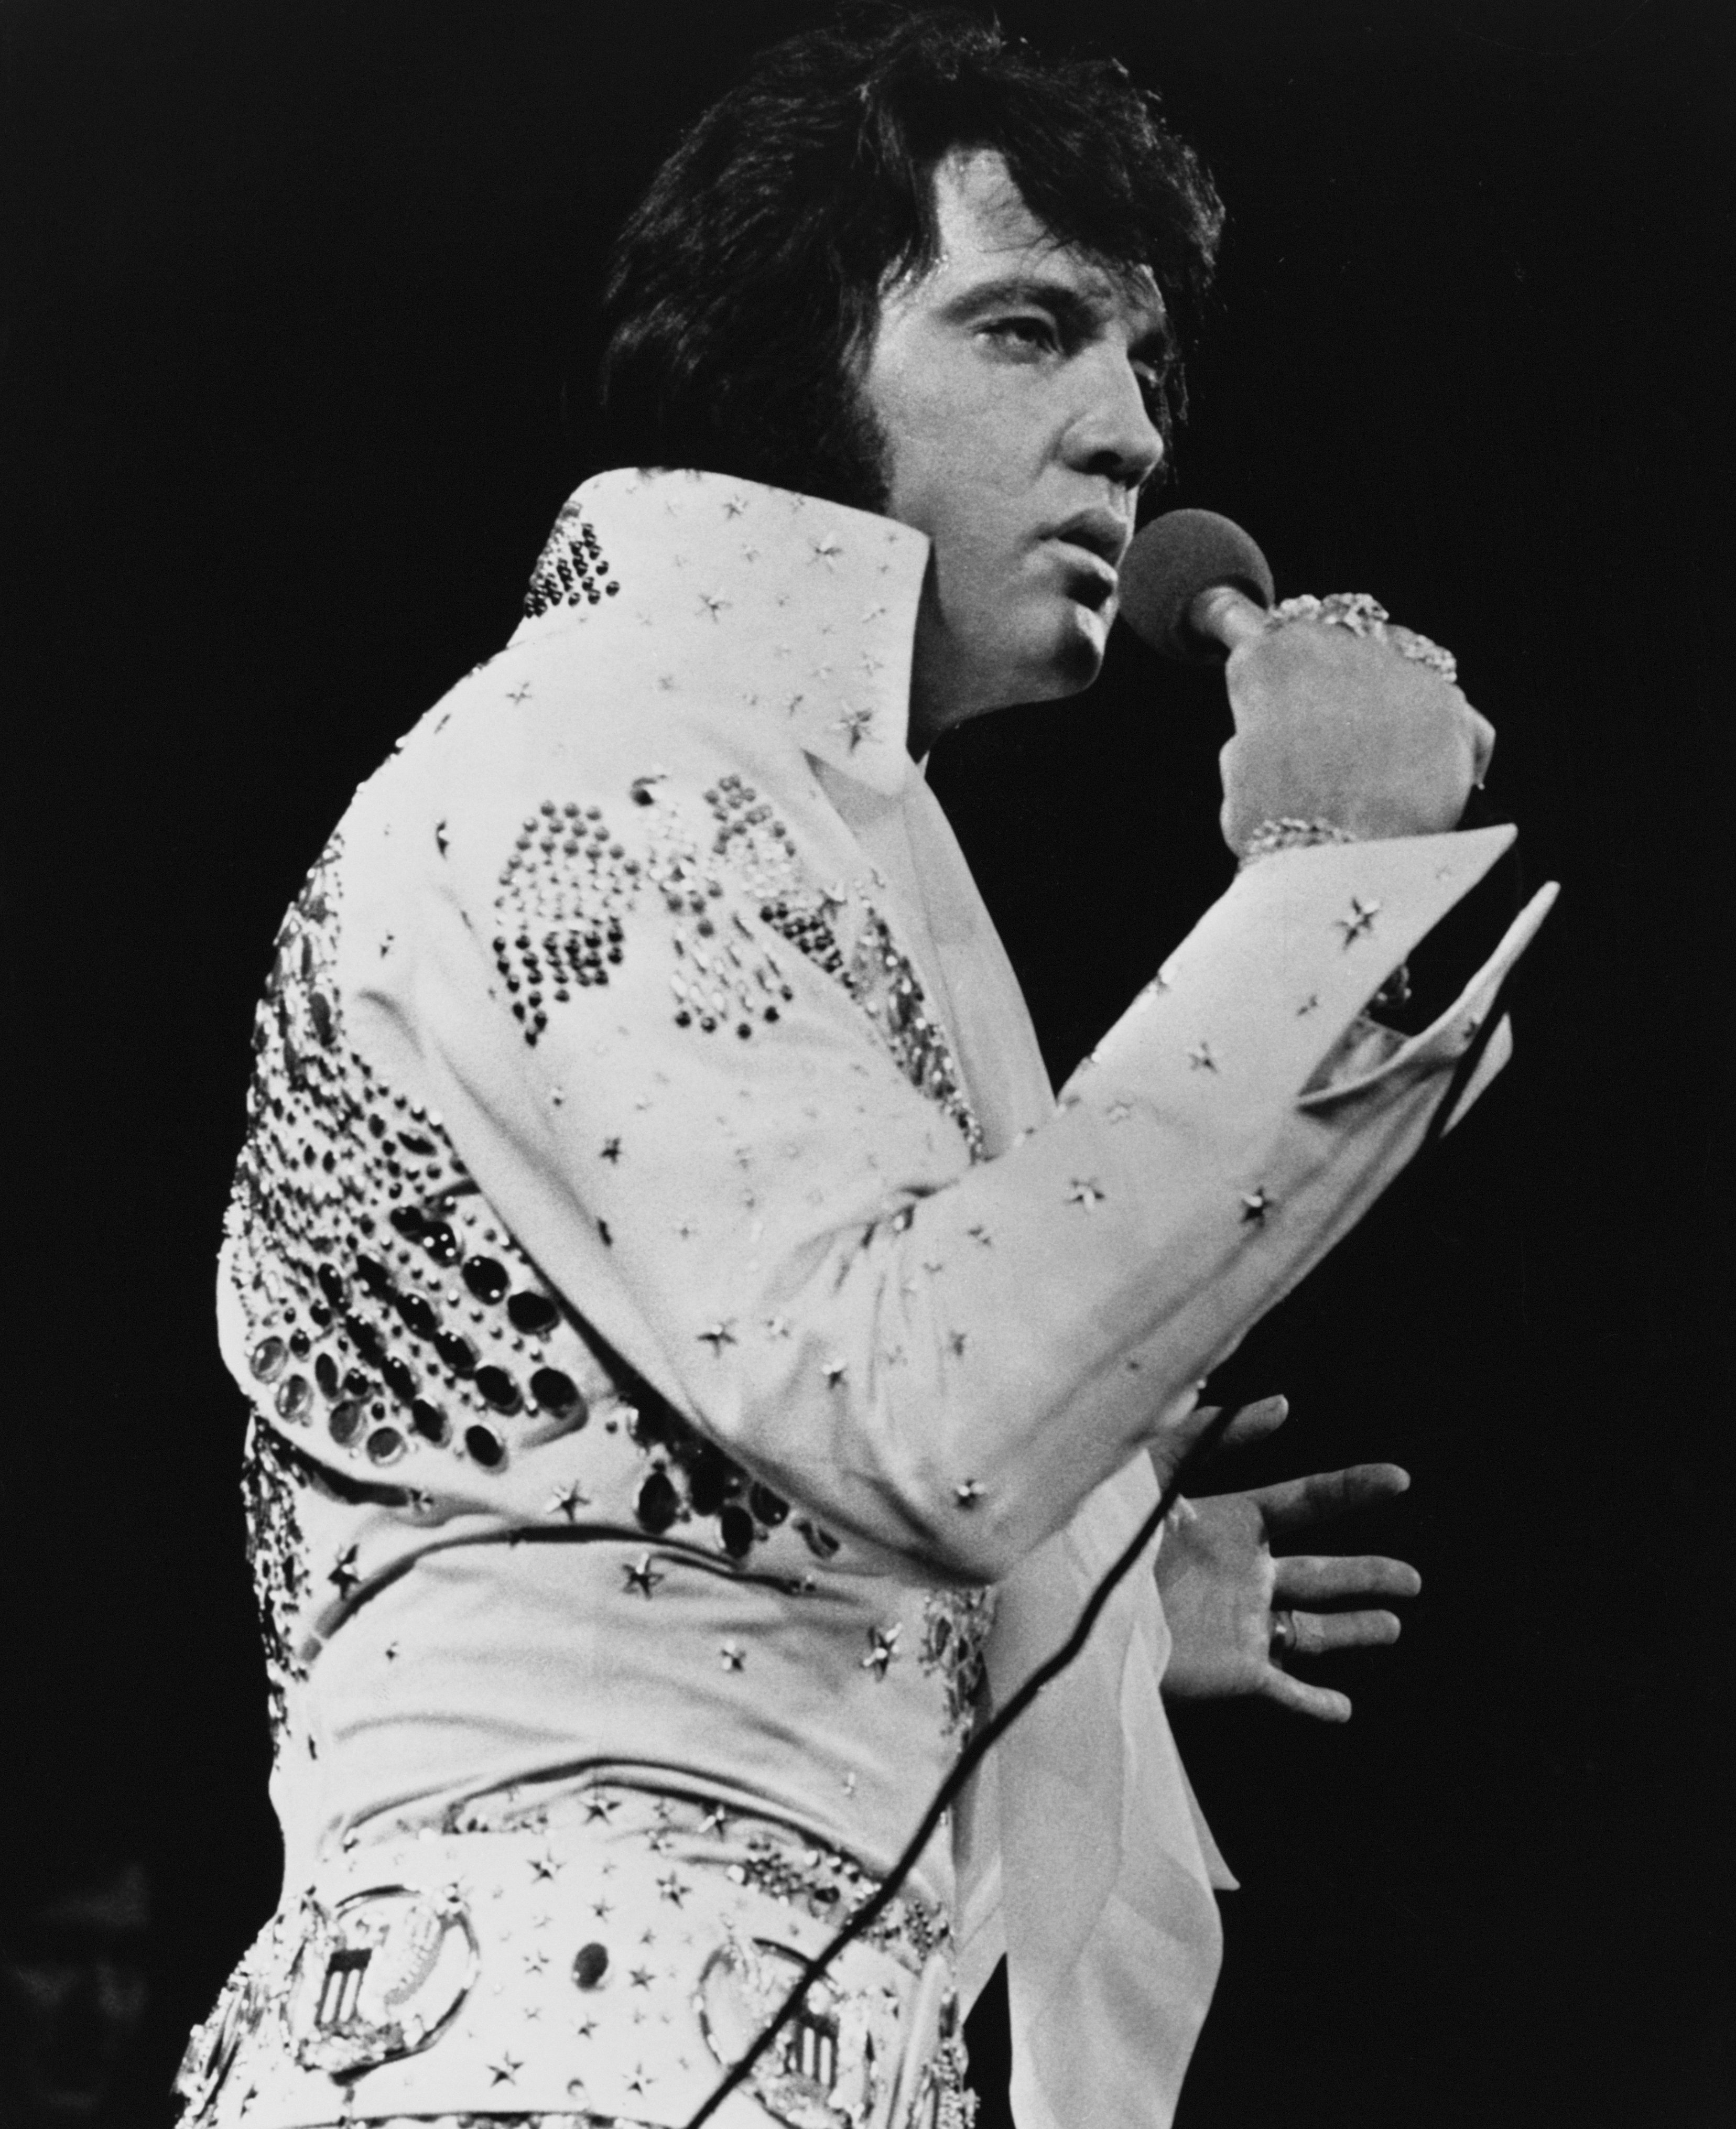 Elvis Presley performing at a concert in Honolulu on January 12, 1973 | Source: Getty Images  